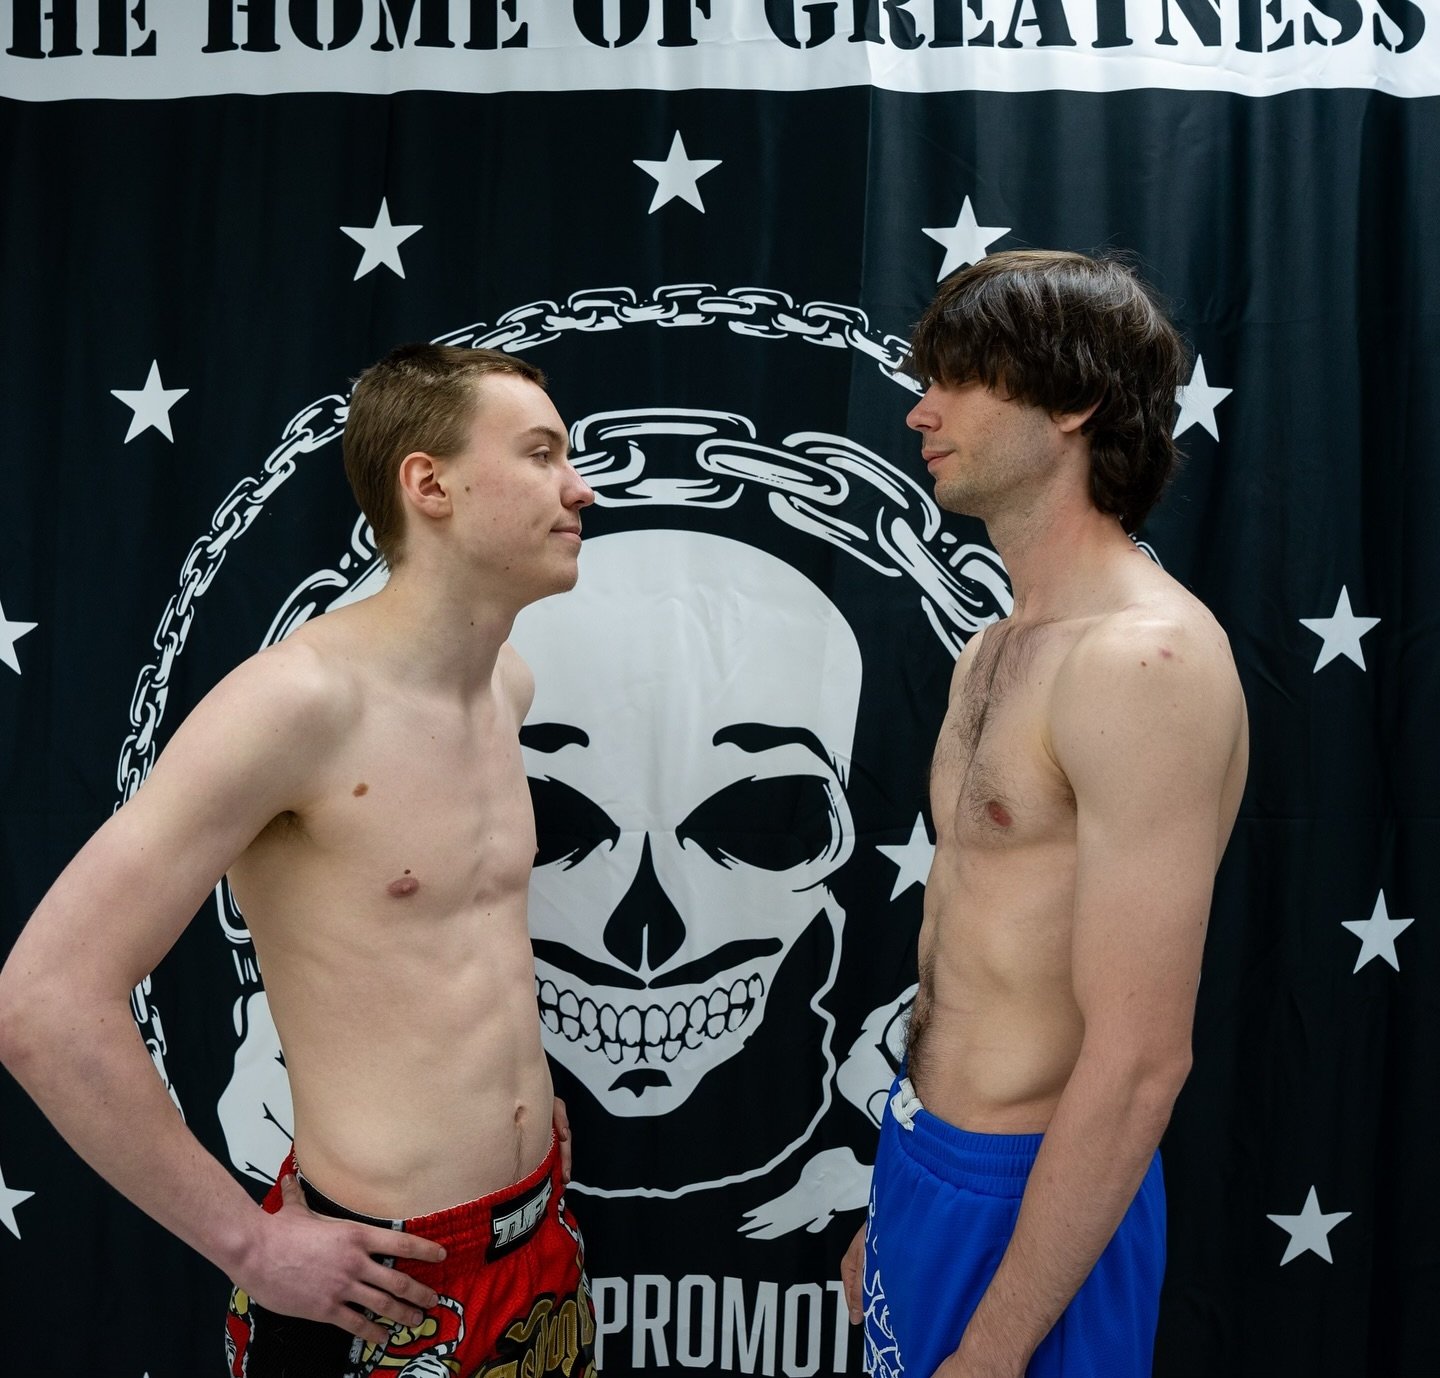 Muay Thai fight 😤
@Connor Herrell vs @Jacob Babiarz 
.
It goes down tonight! Tickets will be available at the door! Can&rsquo;t make it? Order the pay-per-view! Link in bio
Doors open at 5:30pm
Show starts at 6:30pm
.
Venue: The PIAZZA
85 Executive 